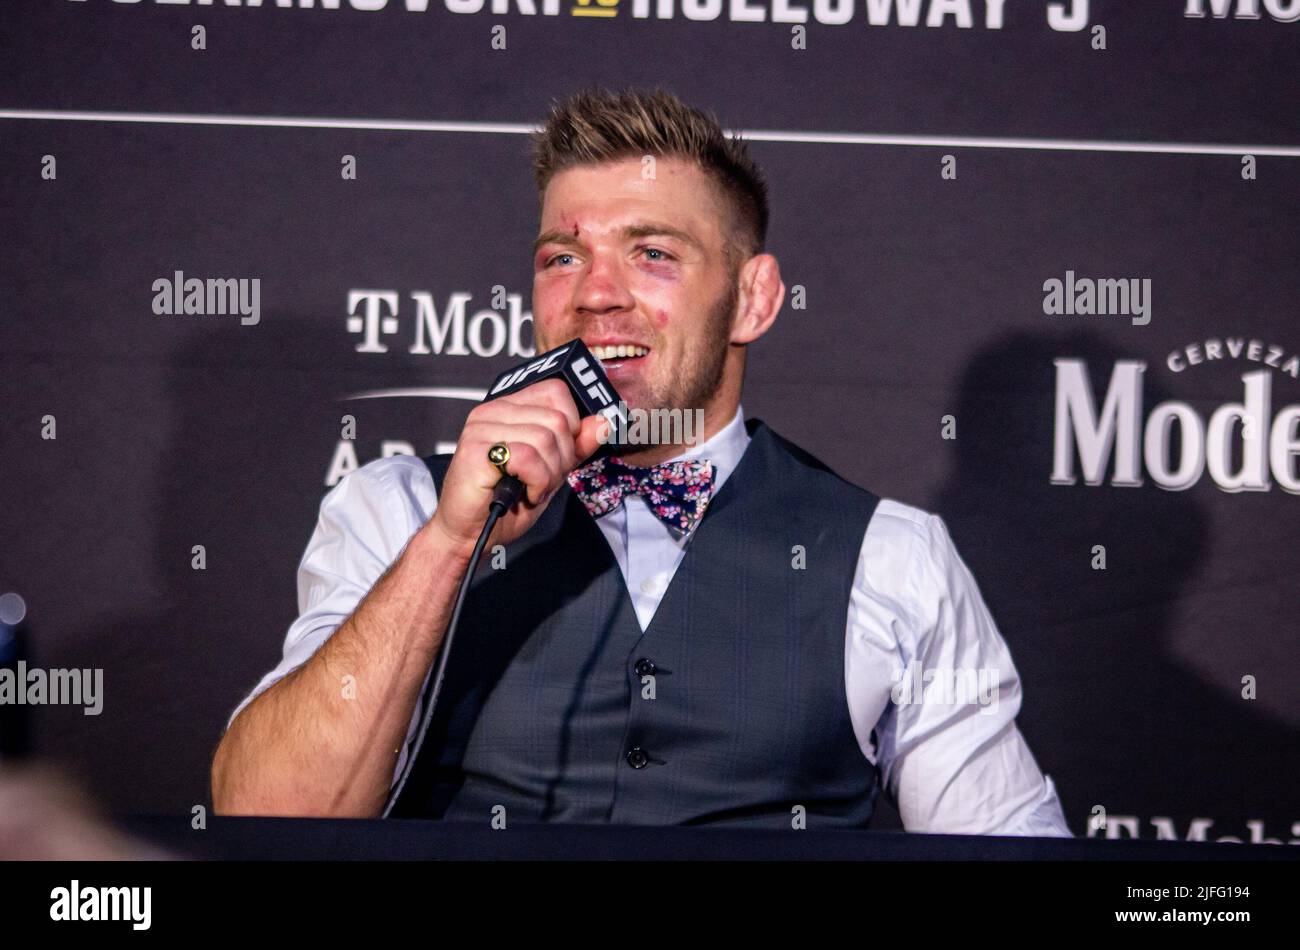 Las Vegas, Nv, United States. 02nd July, 2022. LAS VEGAS, NV - July 2: Dricus Du Plessis addresses the media following his Hard Fought Decision (29-28 x 3) victory over Brad Tavares at UFC 276: Adasenya vs Cannonier at T-Mobile Arena, Las Vegas, NV, United States. (Photo by Matt Davies/PxImages) Credit: Px Images/Alamy Live News Stock Photo